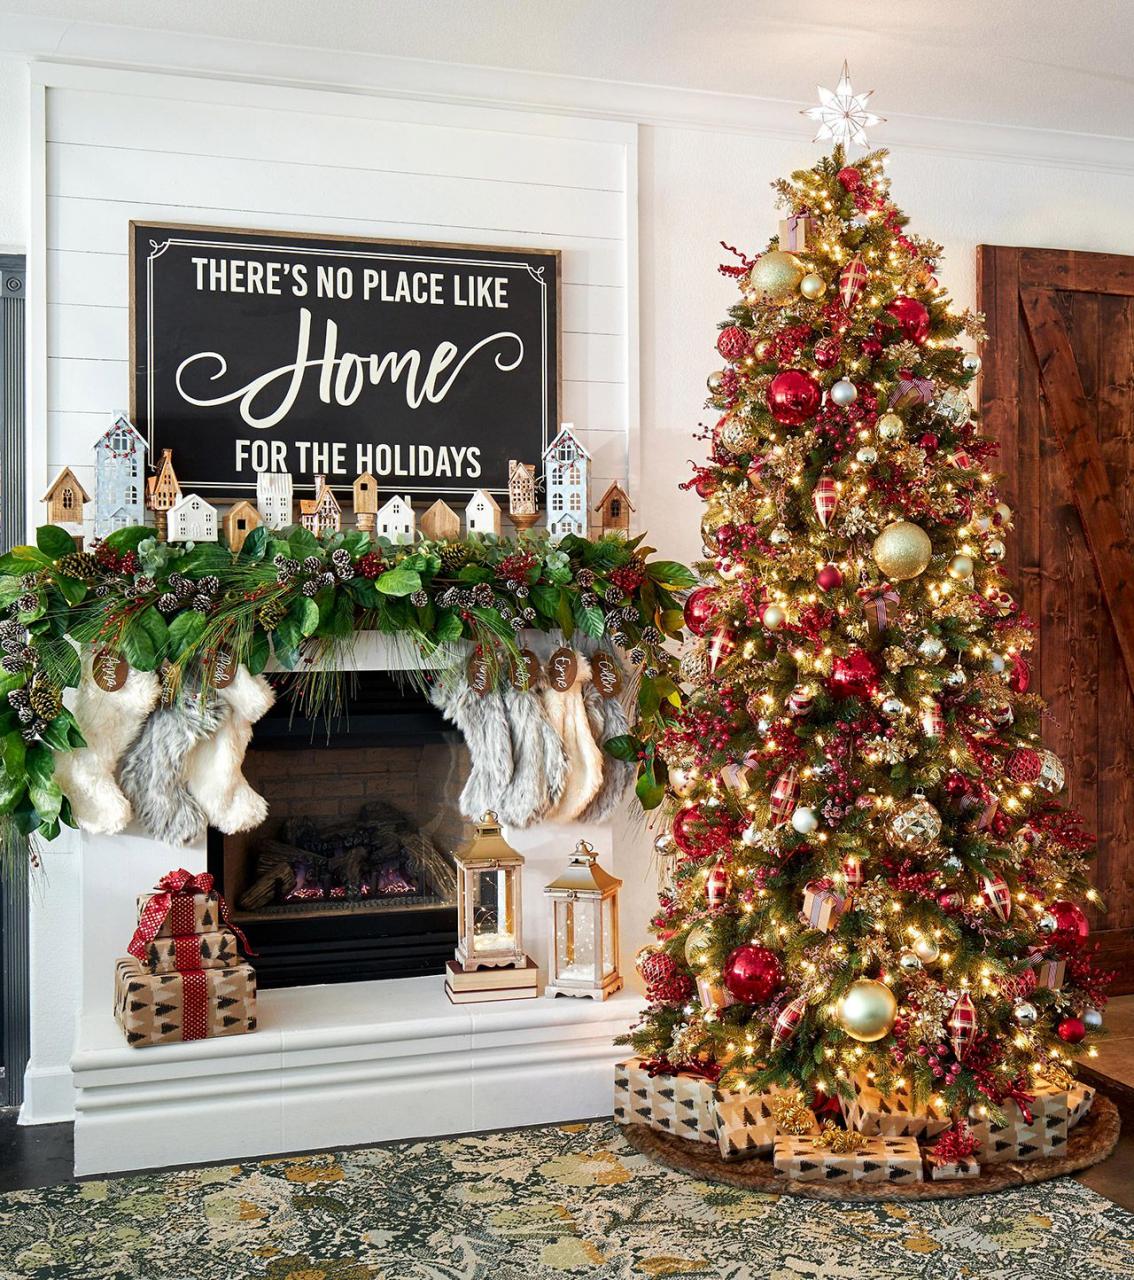 7 Decorative Holiday Mantel Ideas That Are Filled with Charm